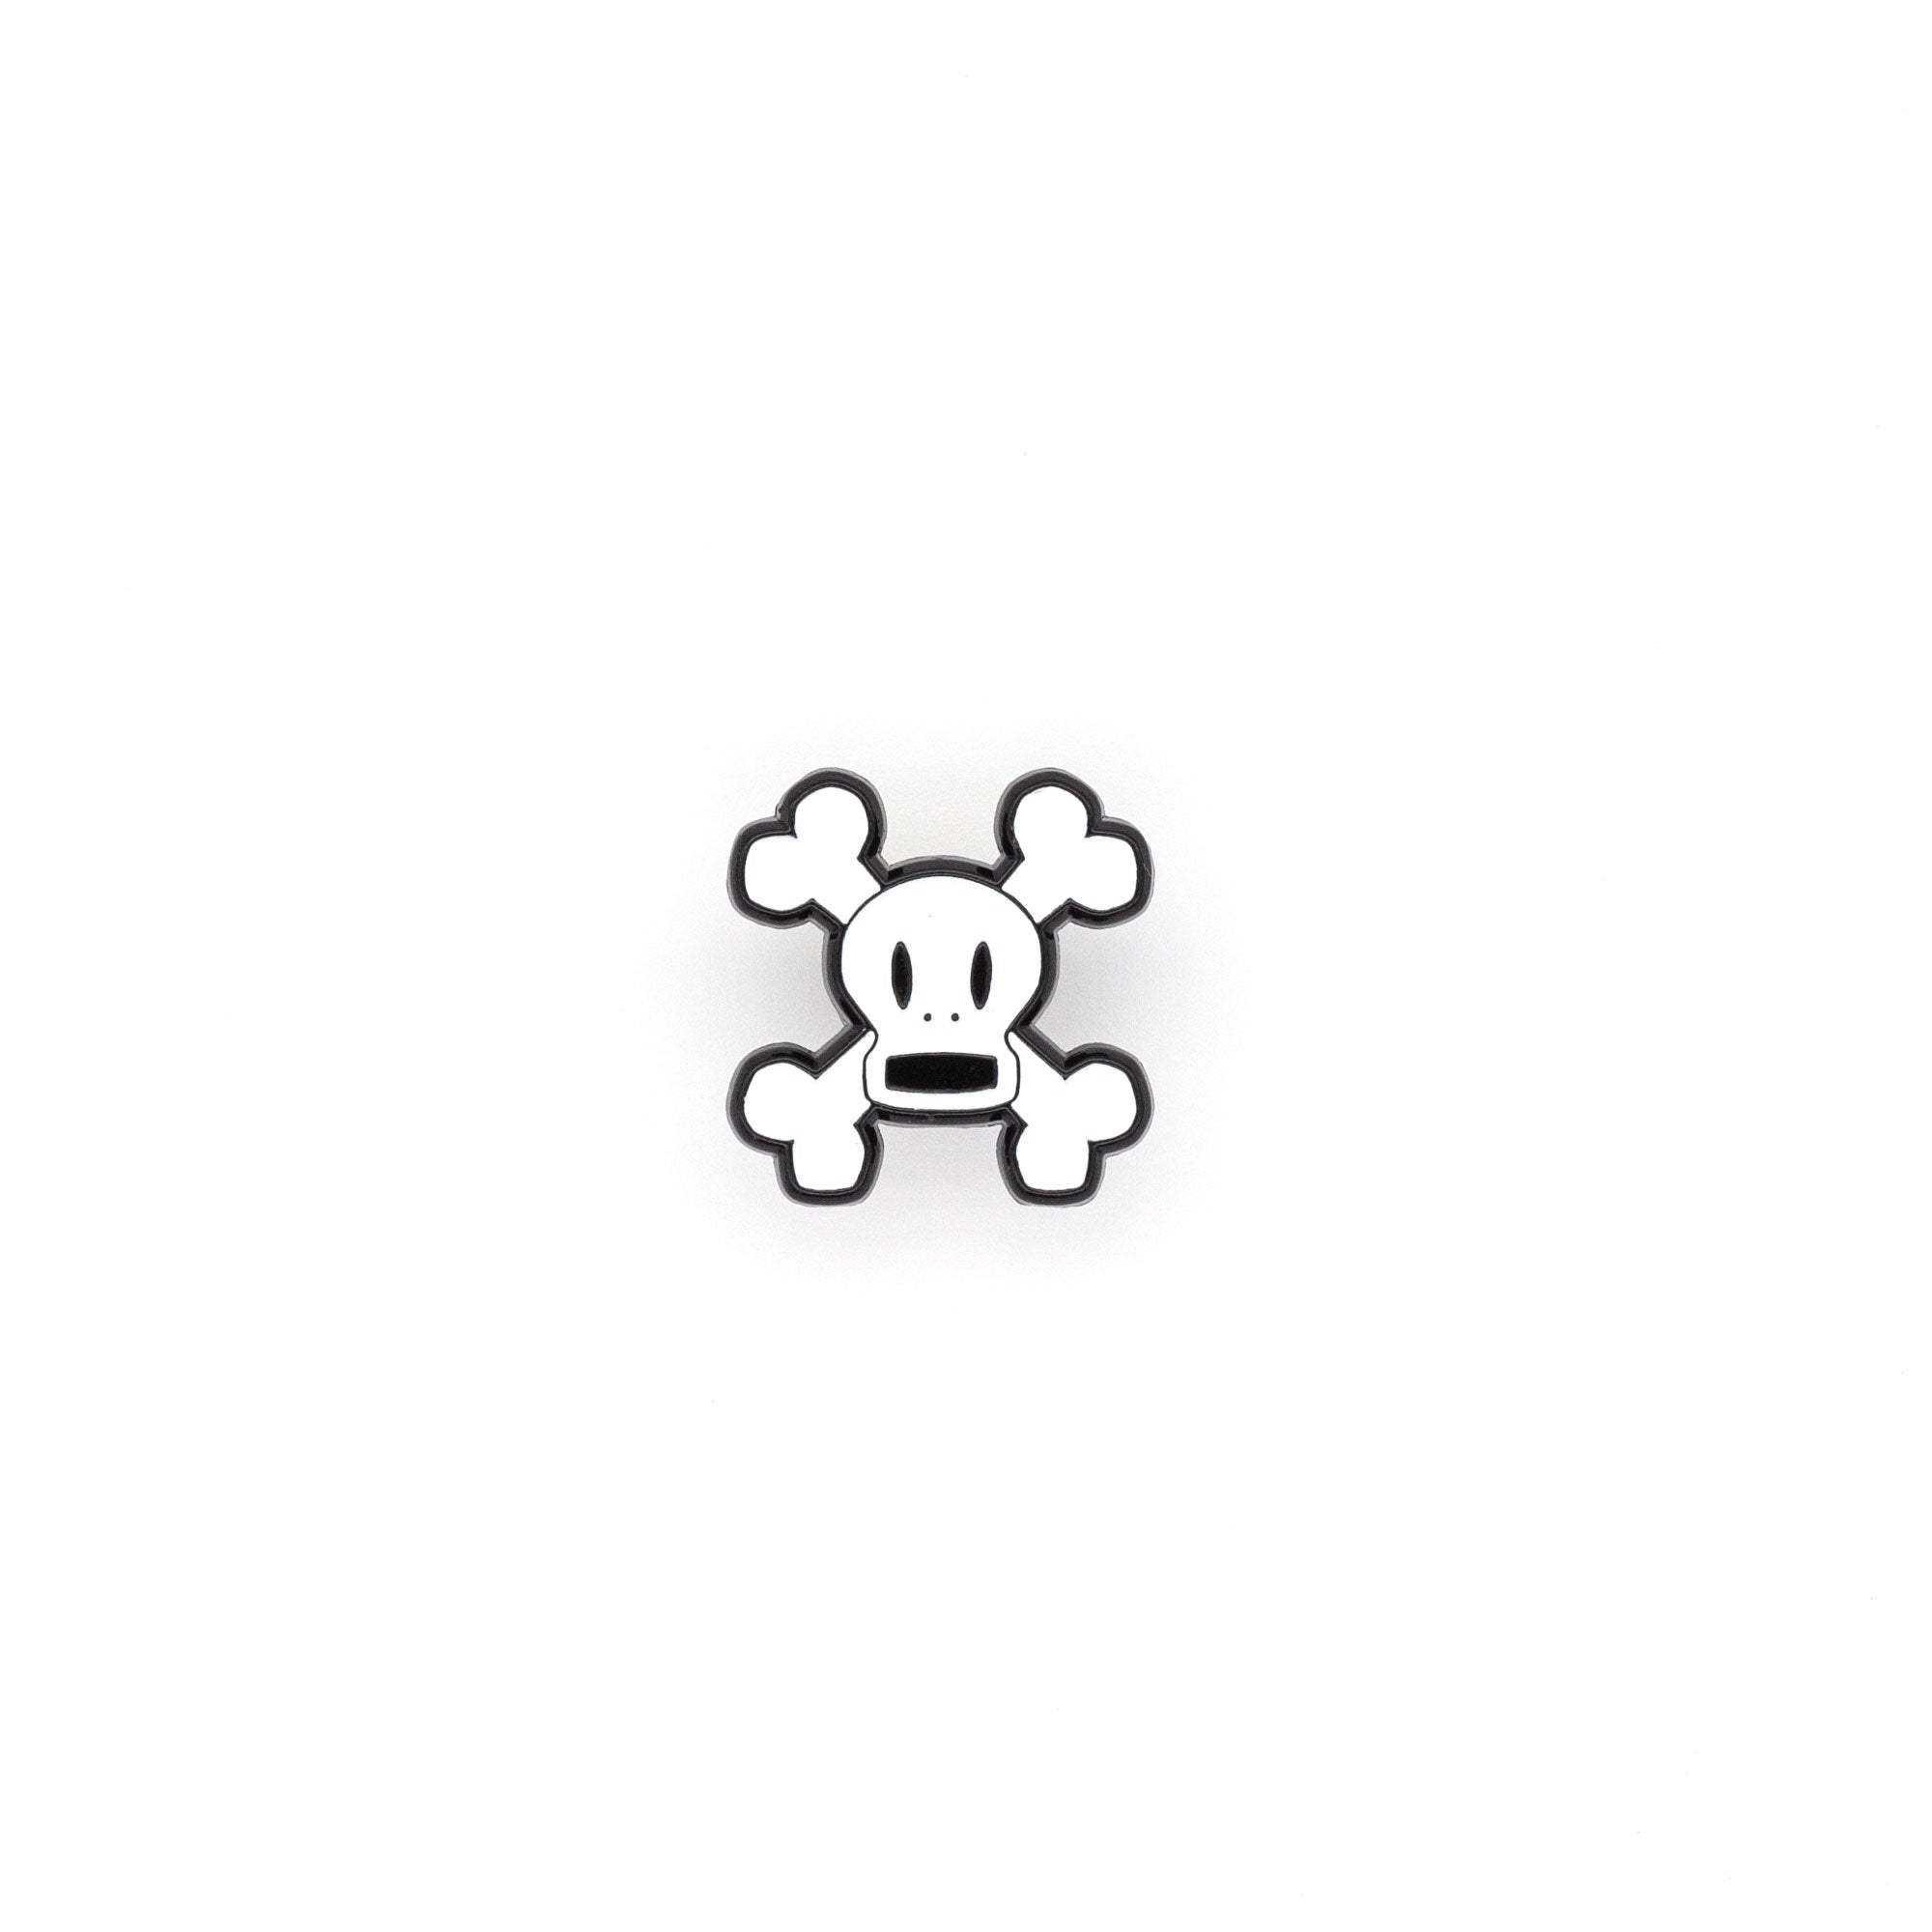 Skurvy is a soft enamel pin of white crossbones with an open mouth. shot on a white background